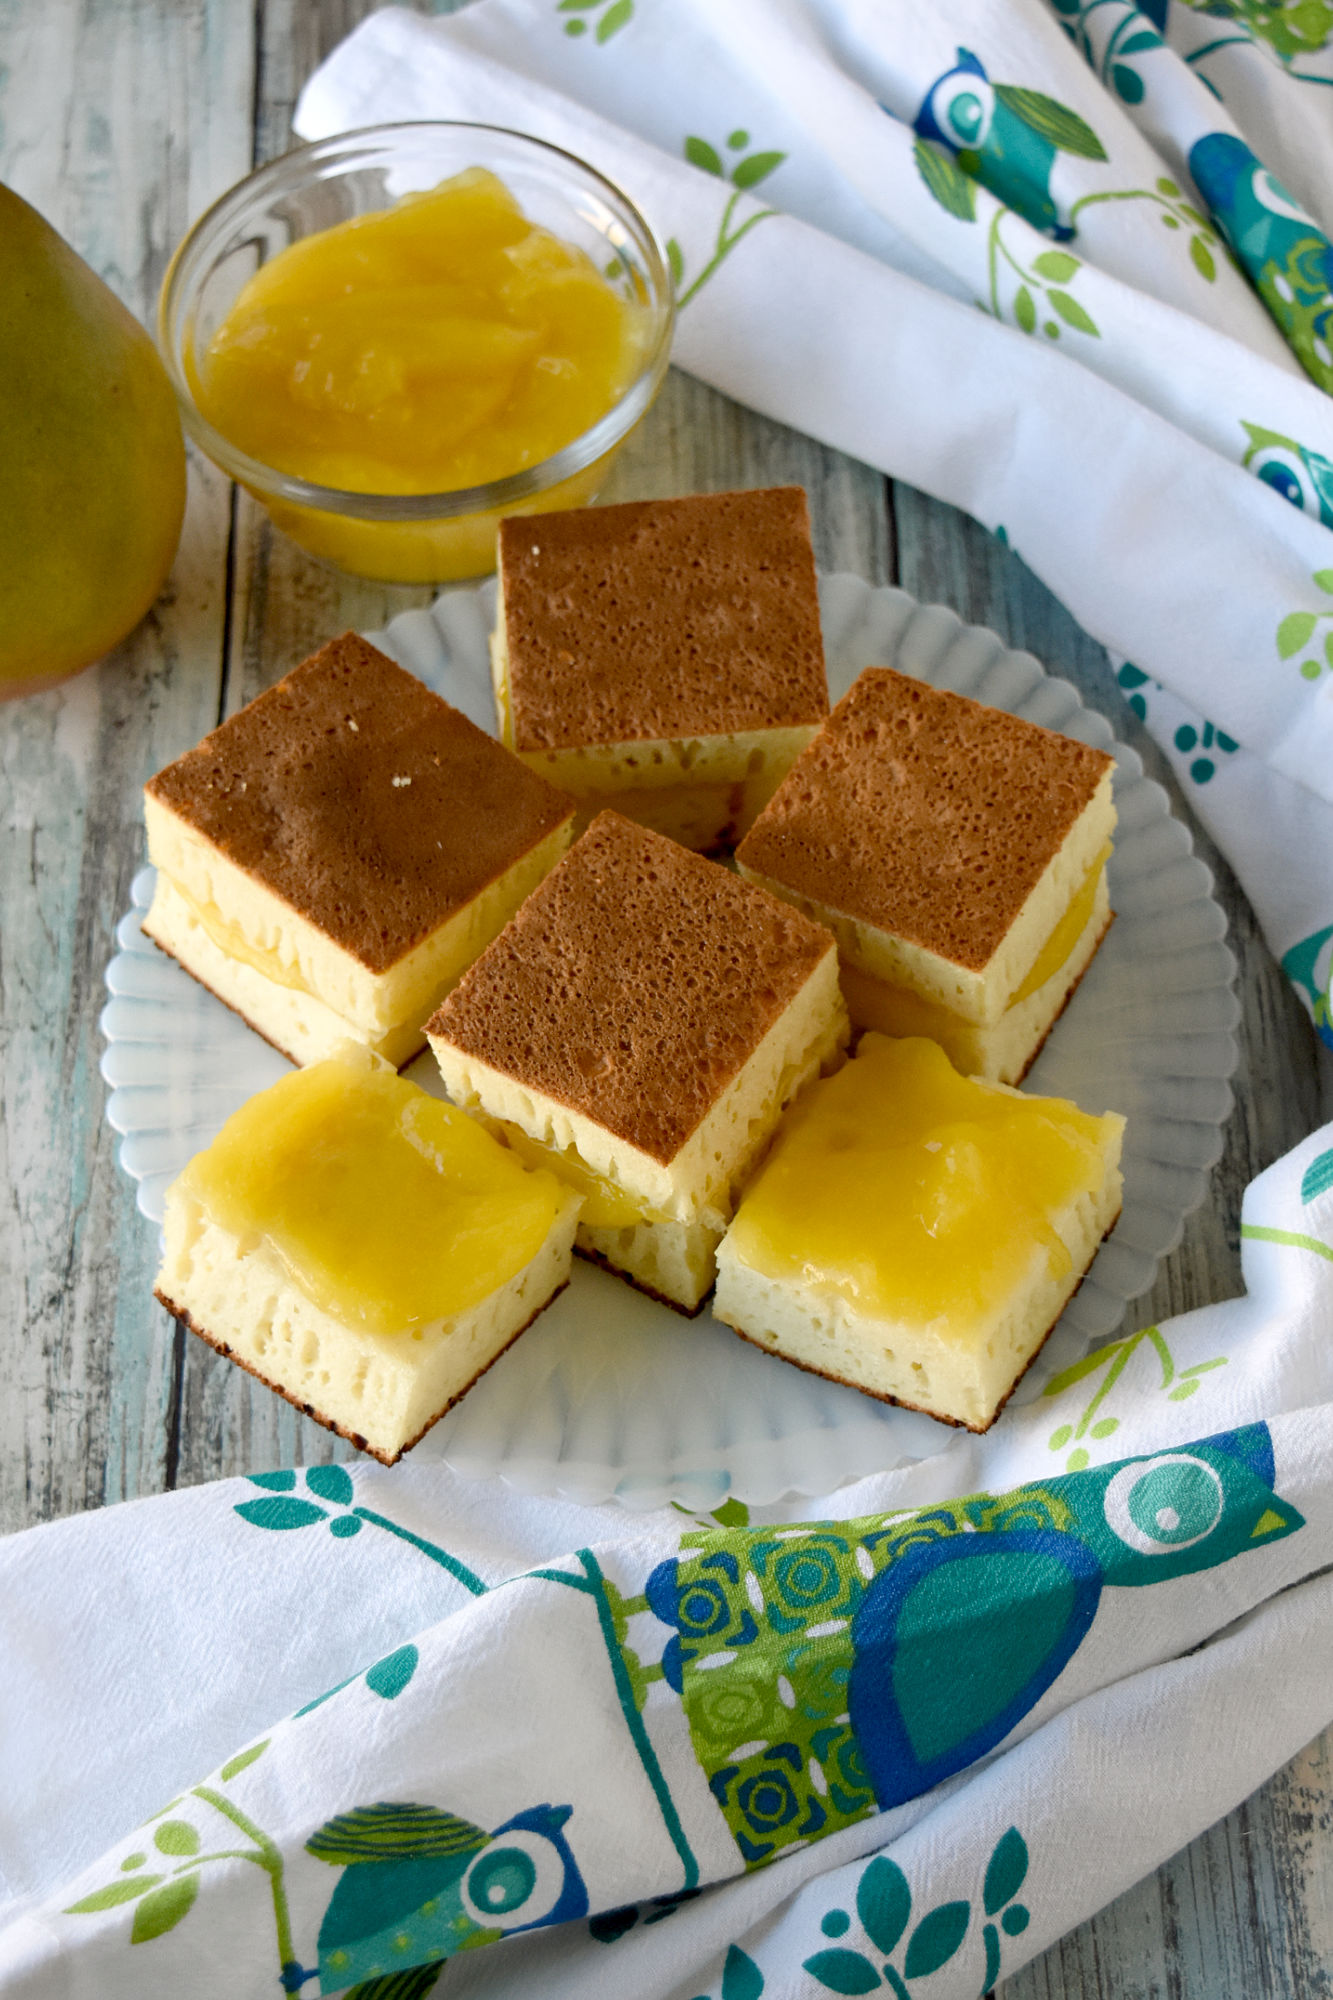 Mango Filled Martabak Manis has a sweet tart mango filling.  This popular sweet street food typically has chocolate, peanuts, and even sweetened condensed milk filling. #SpringSweetsWeek